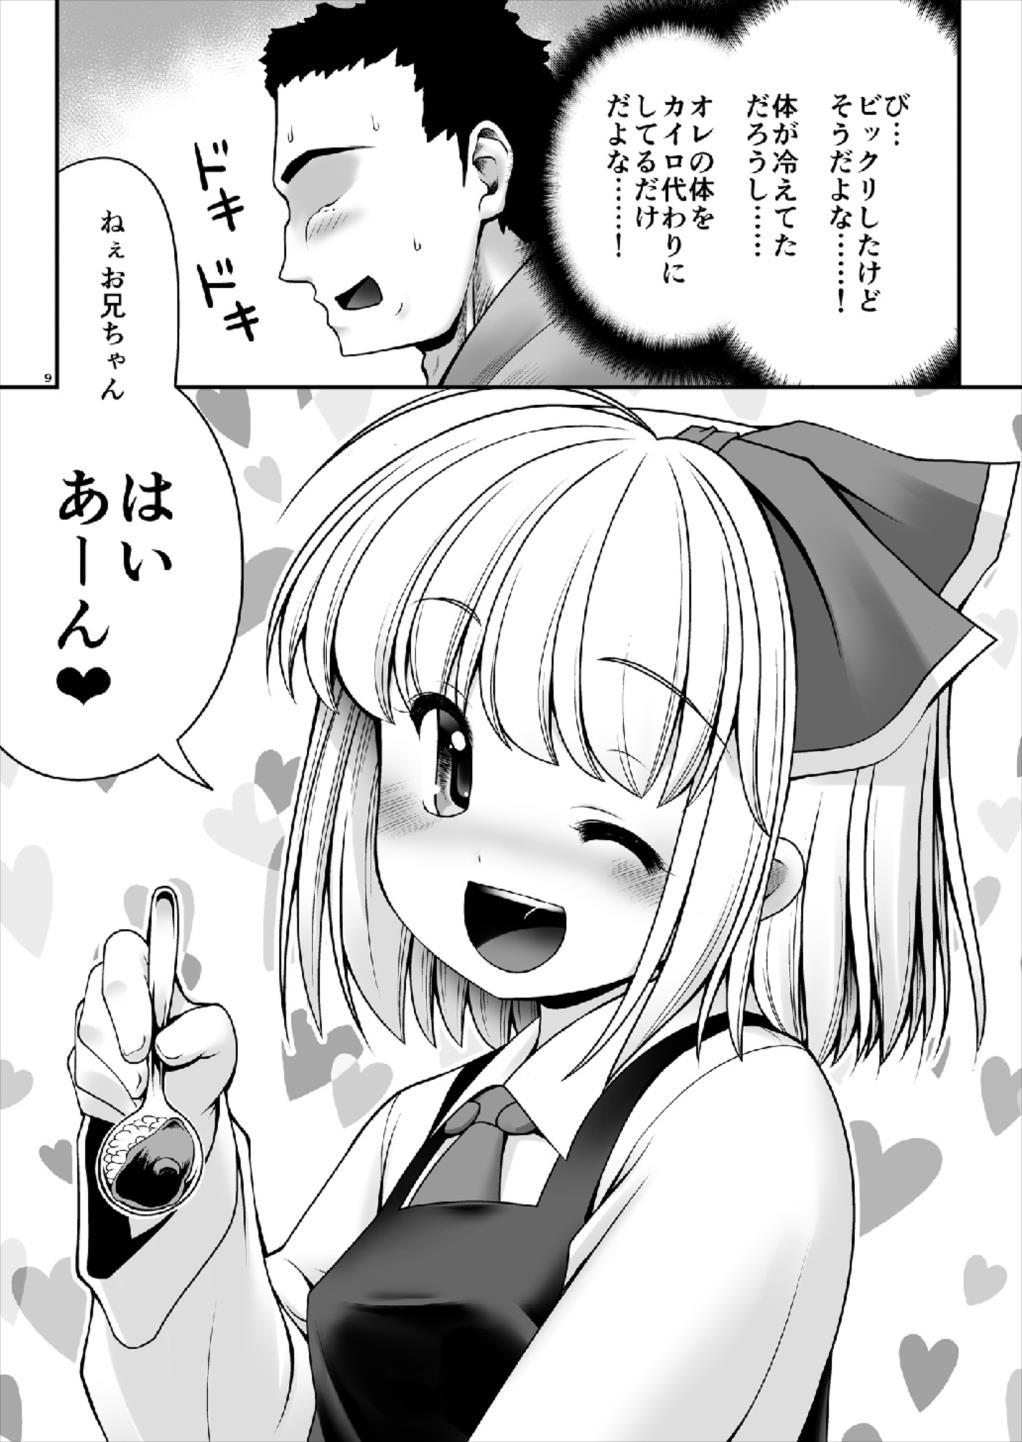 Free 18 Year Old Porn "Okaeshi" - Touhou project Step Fantasy - Page 8